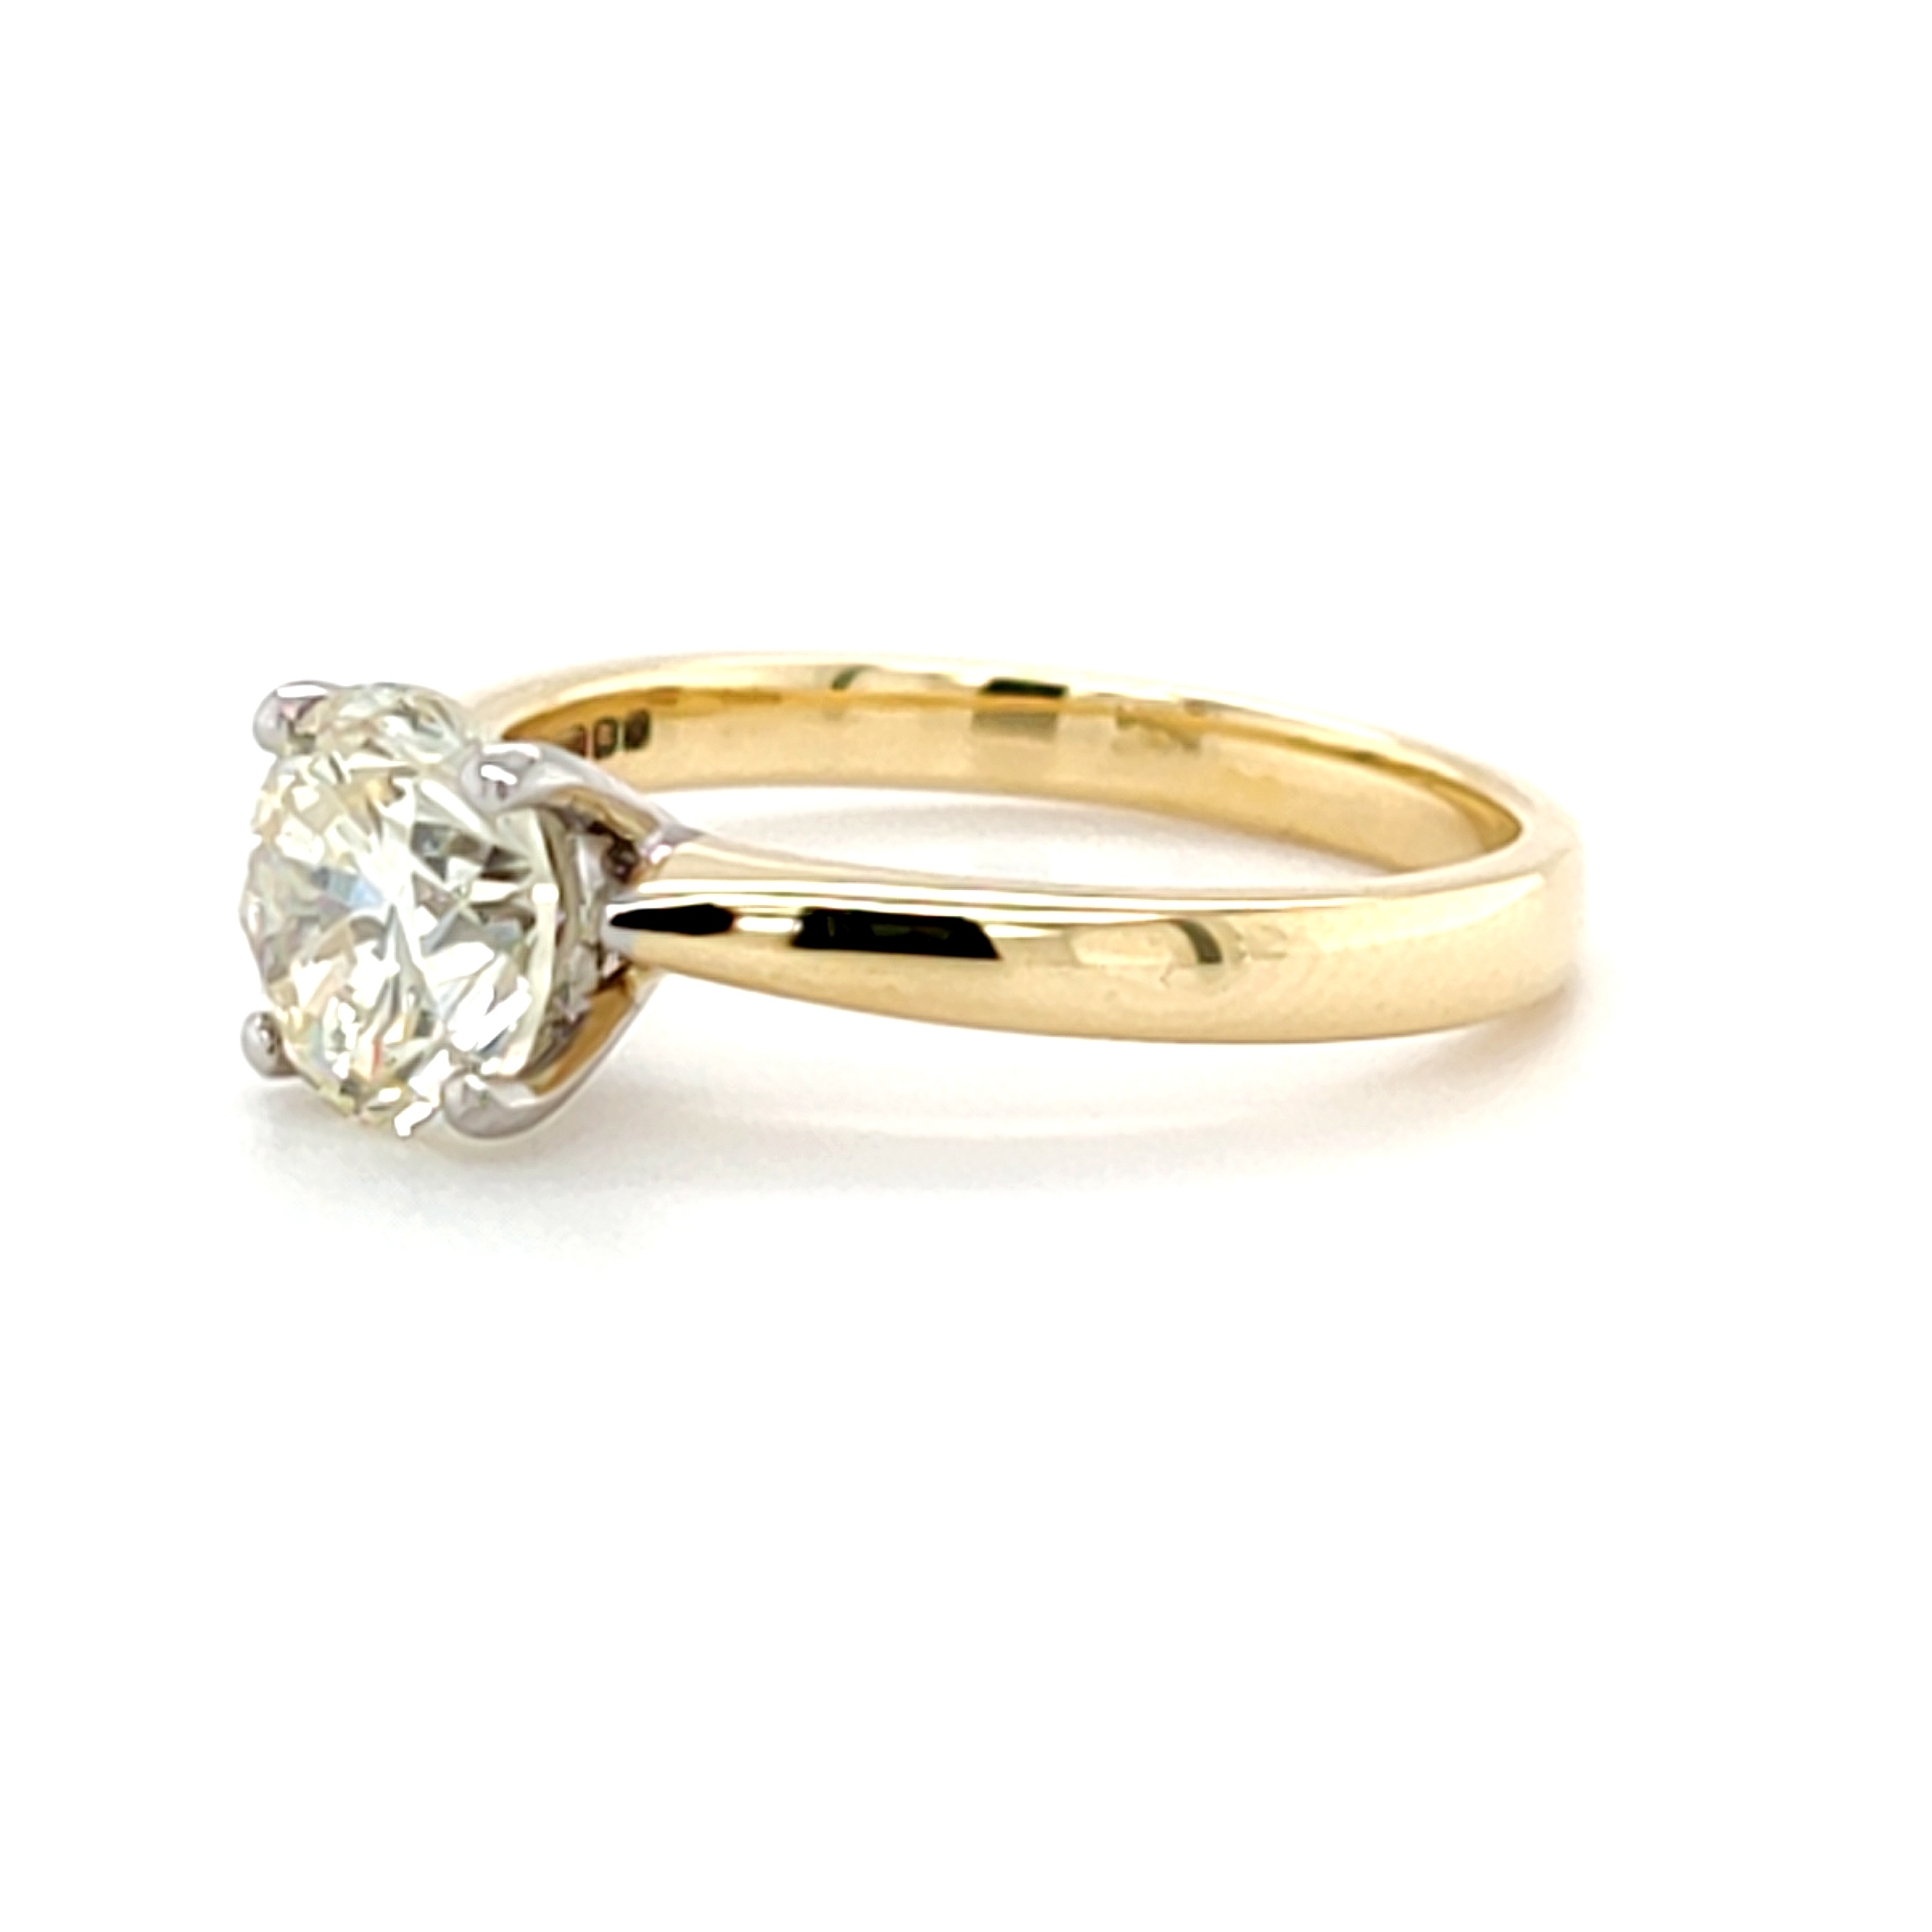 1.52ct 18ct Yellow and White Gold Diamond Solitaire Ring